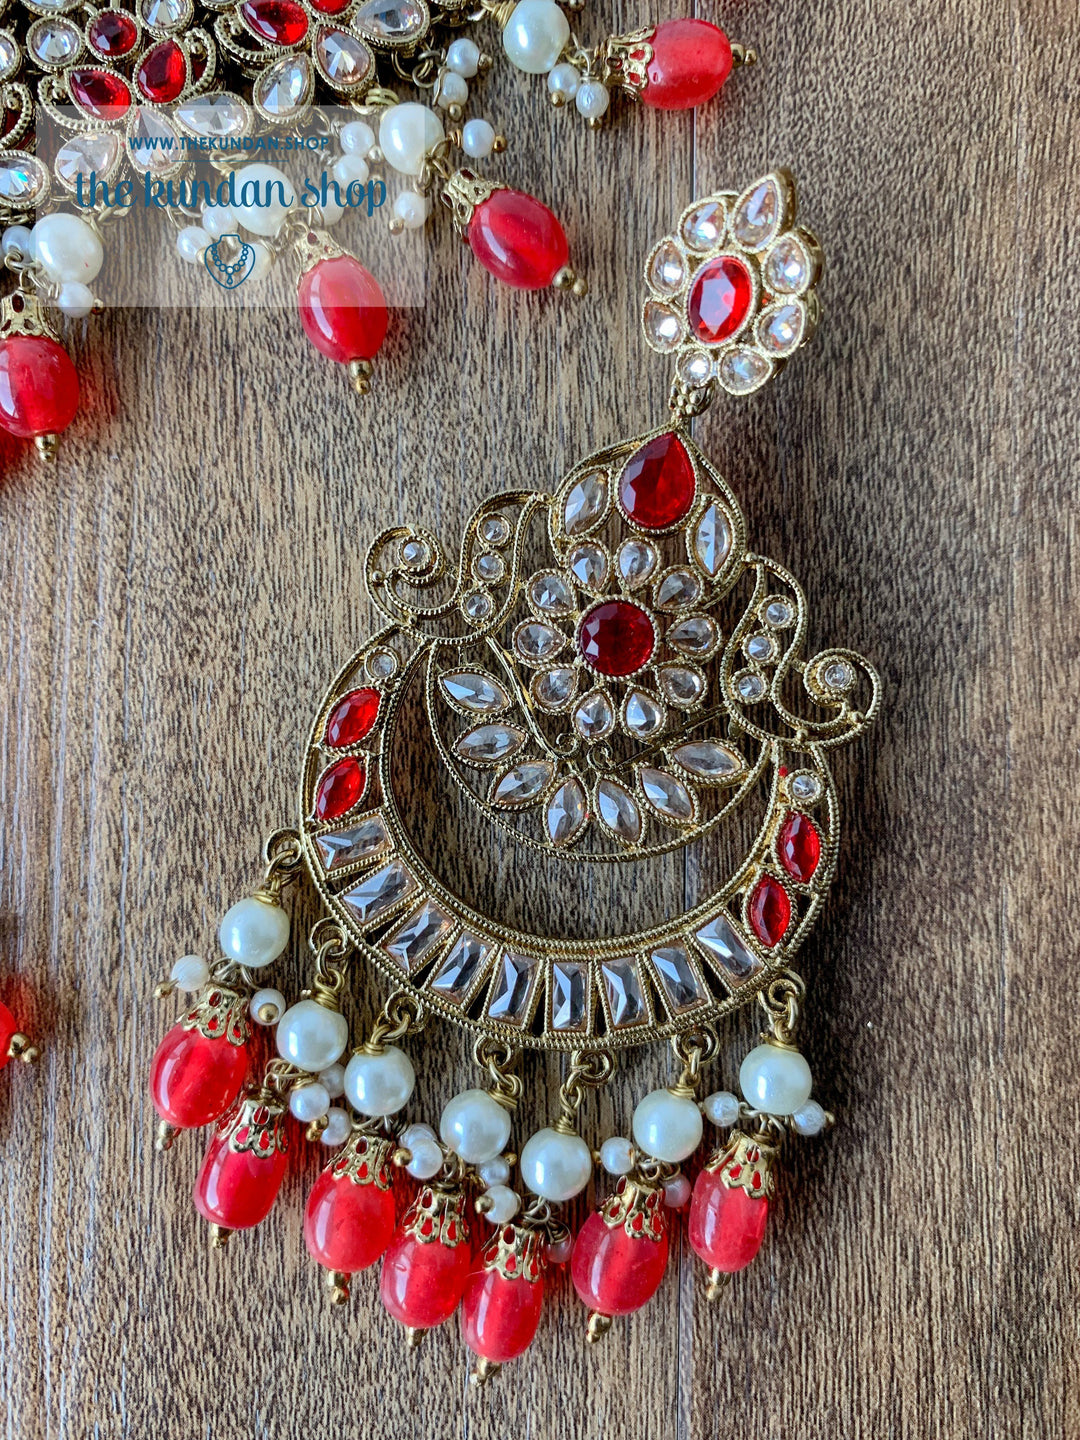 Complexed in Polki, in Red Necklace Sets THE KUNDAN SHOP 